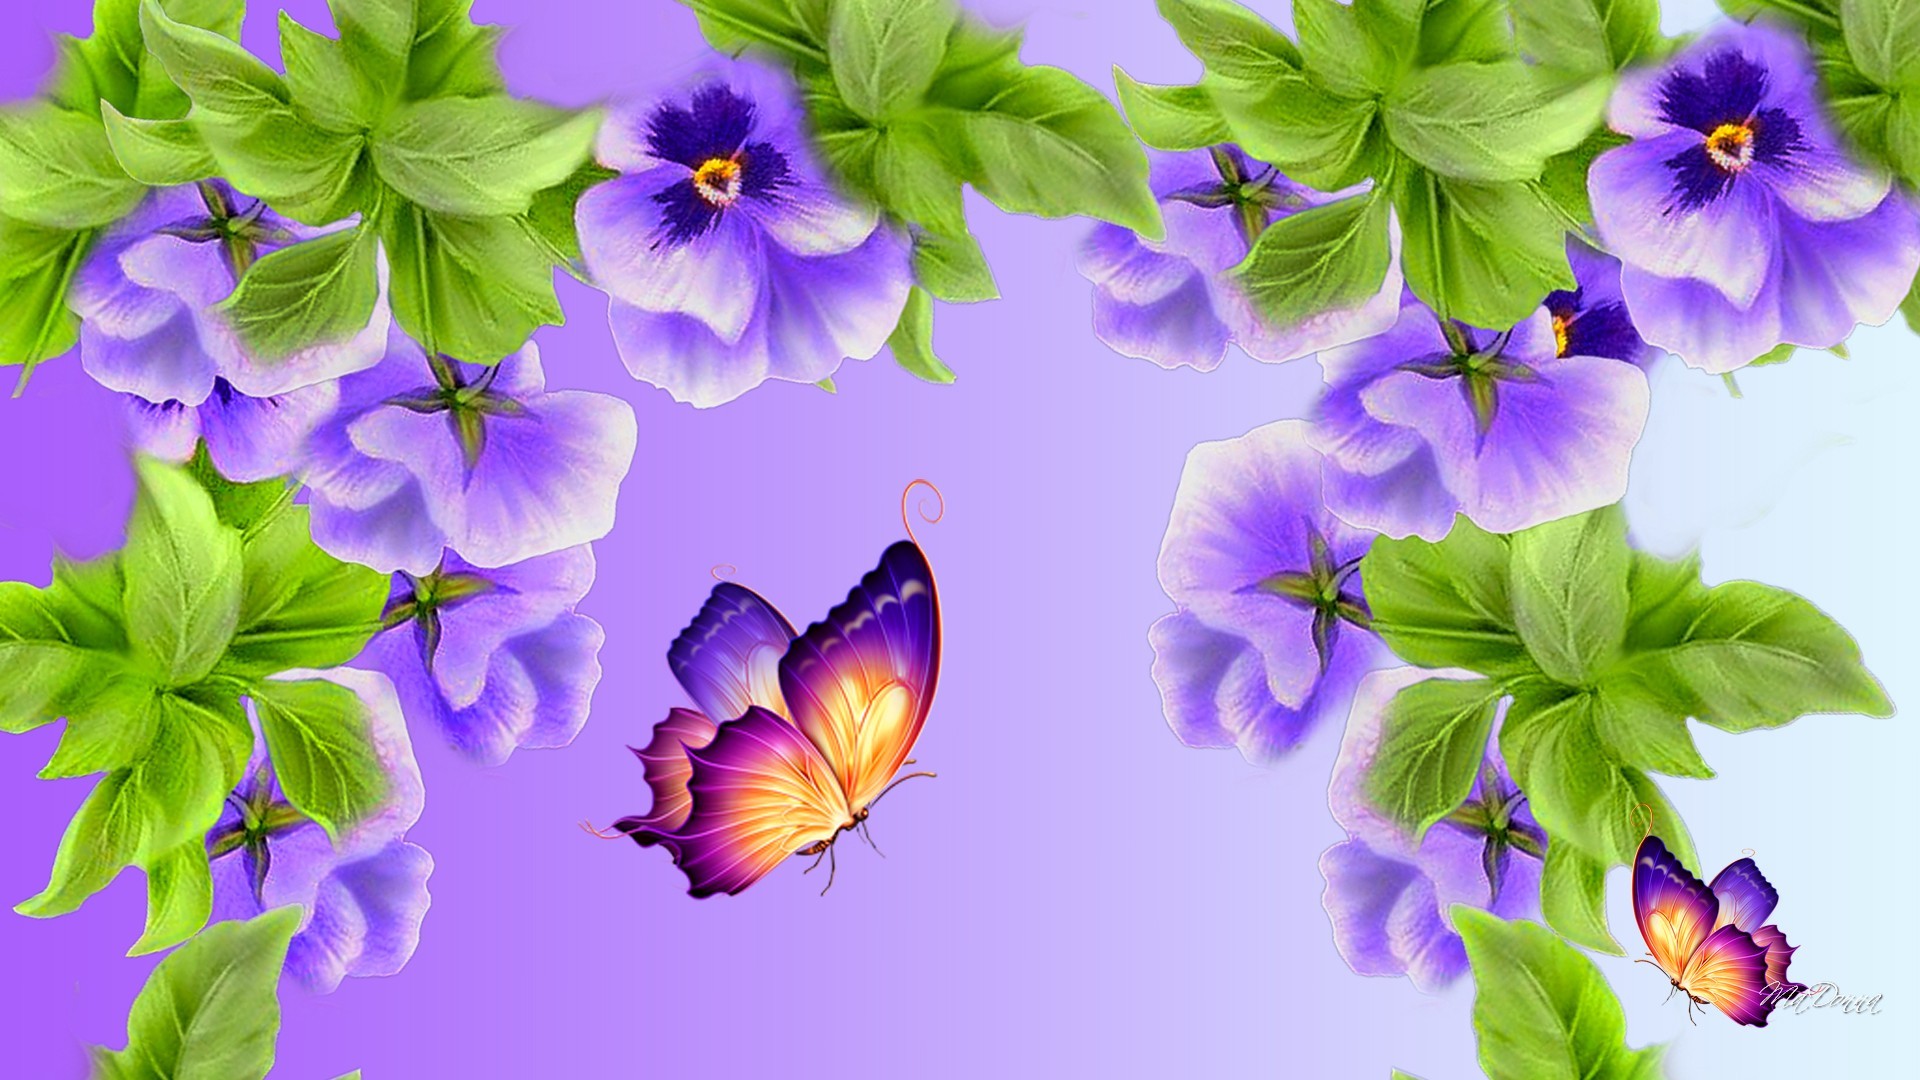 Flowers: Violet Pansies Fresh Pansy Butterfly Flowers Lavender ...